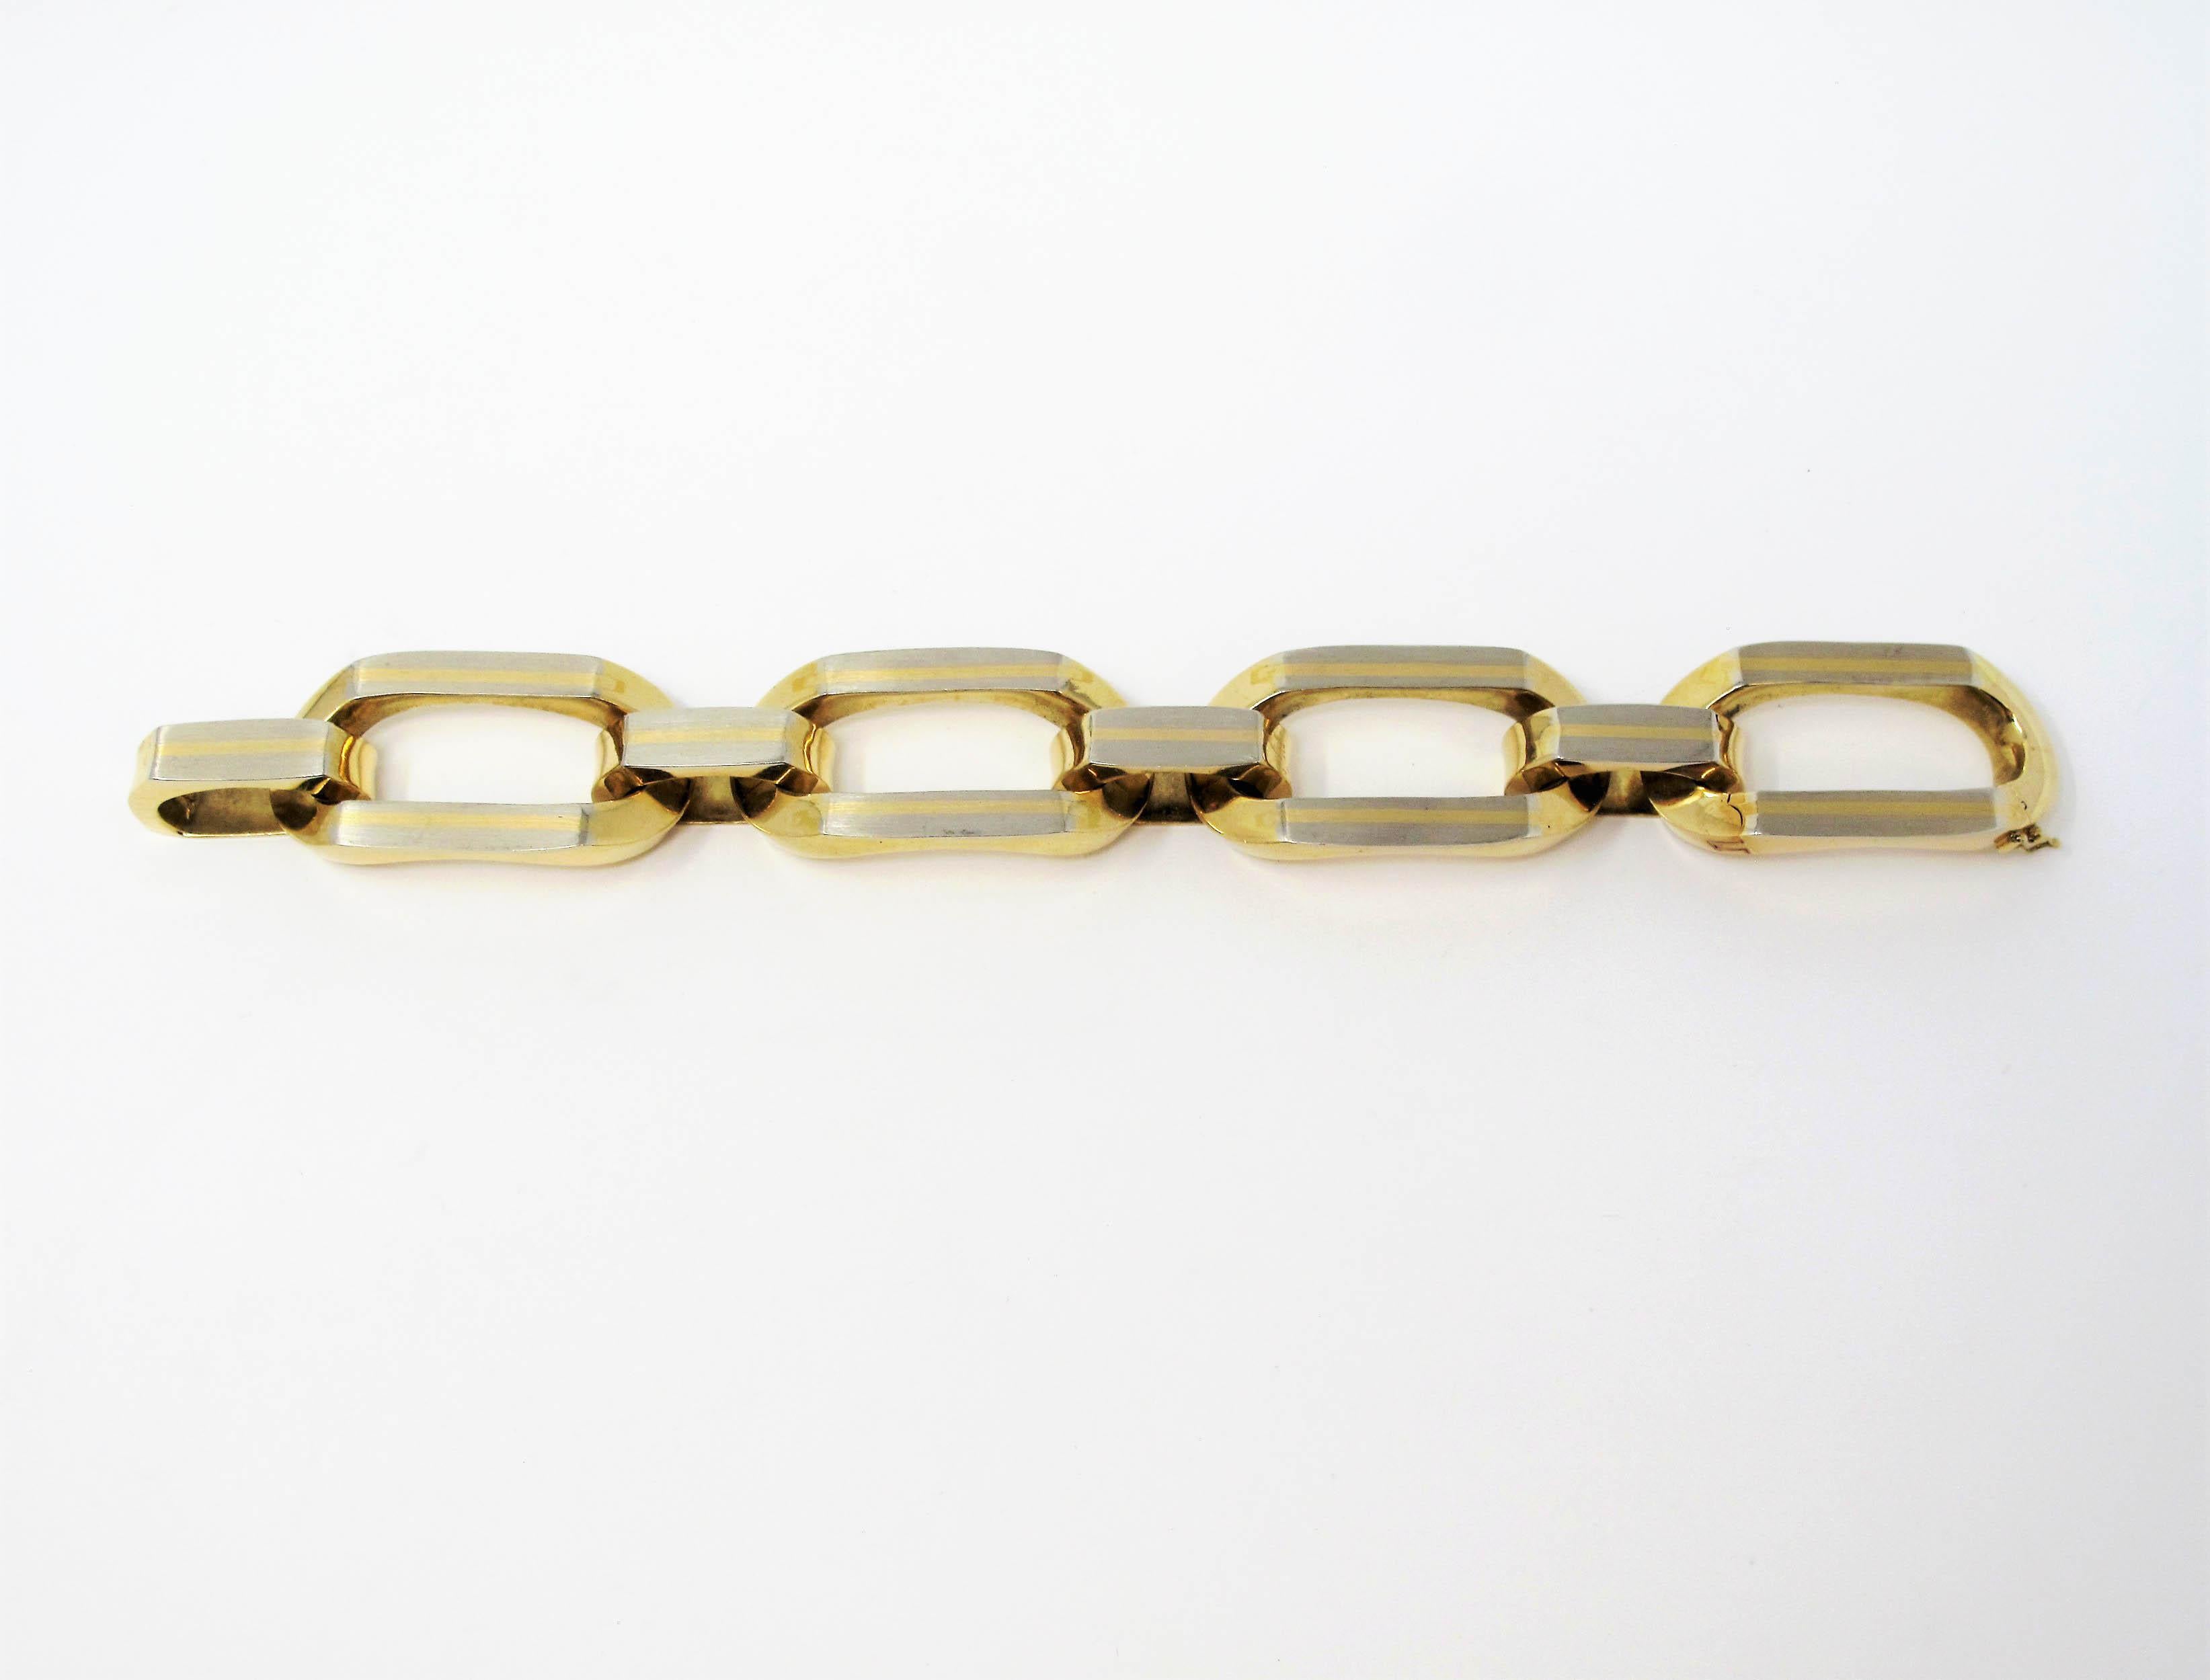 Incredible sleek two tone gold link bracelet in a chunky, over sized style. This bracelet was built to make a statement! The extra large links offer a subtle contrasting yellow and white gold design and feature a smooth flash and satin finish. This